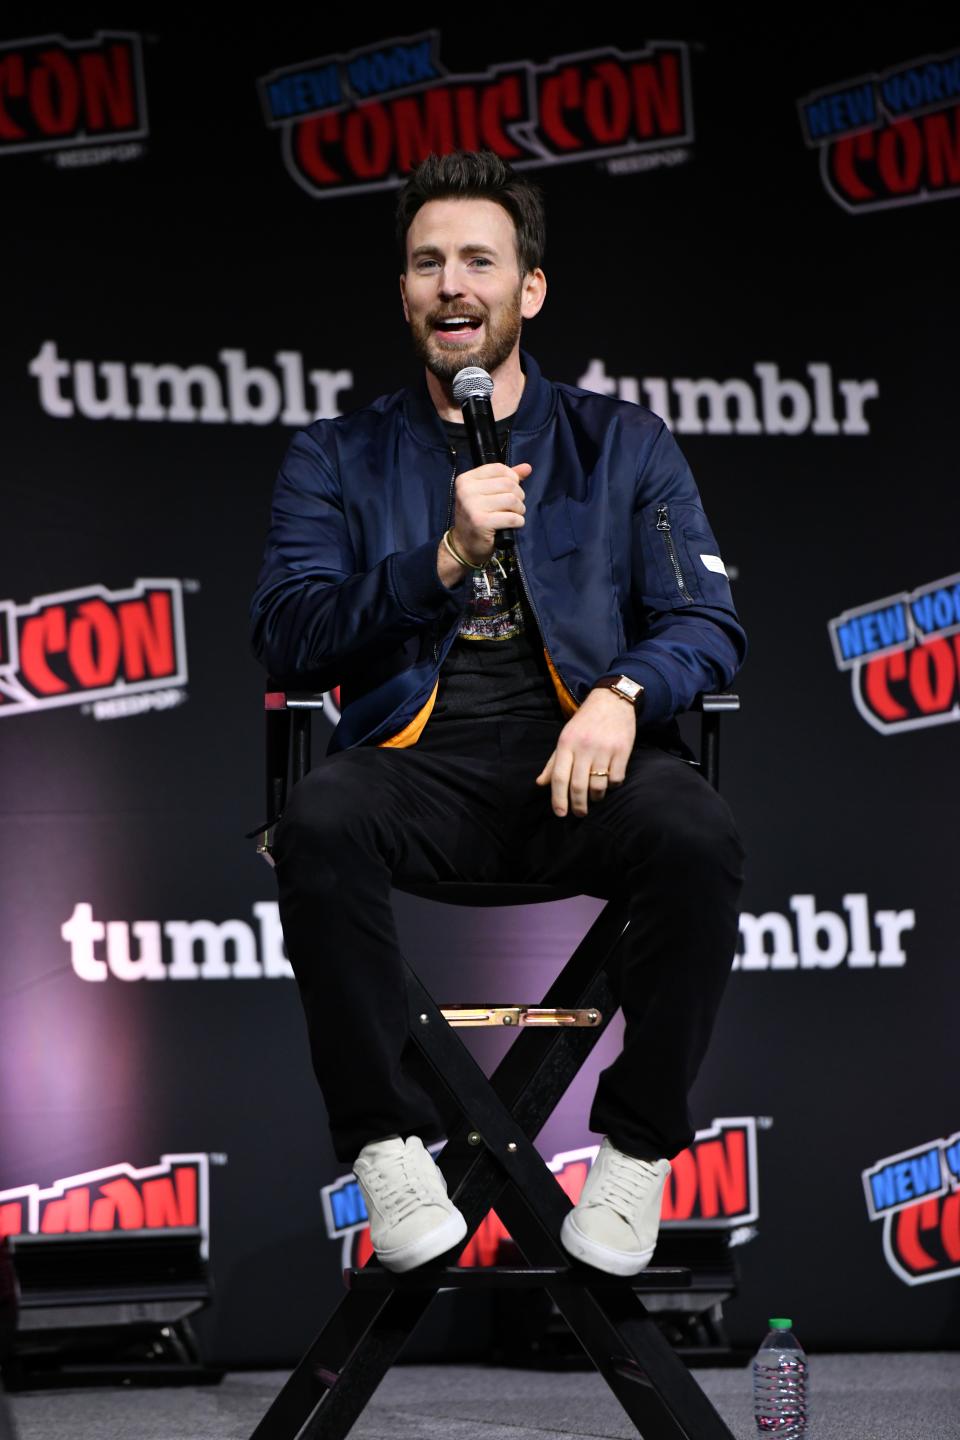 Chris Evans speaks at a Spotlight panel during New York Comic Con 2023 on October 14, 2023.